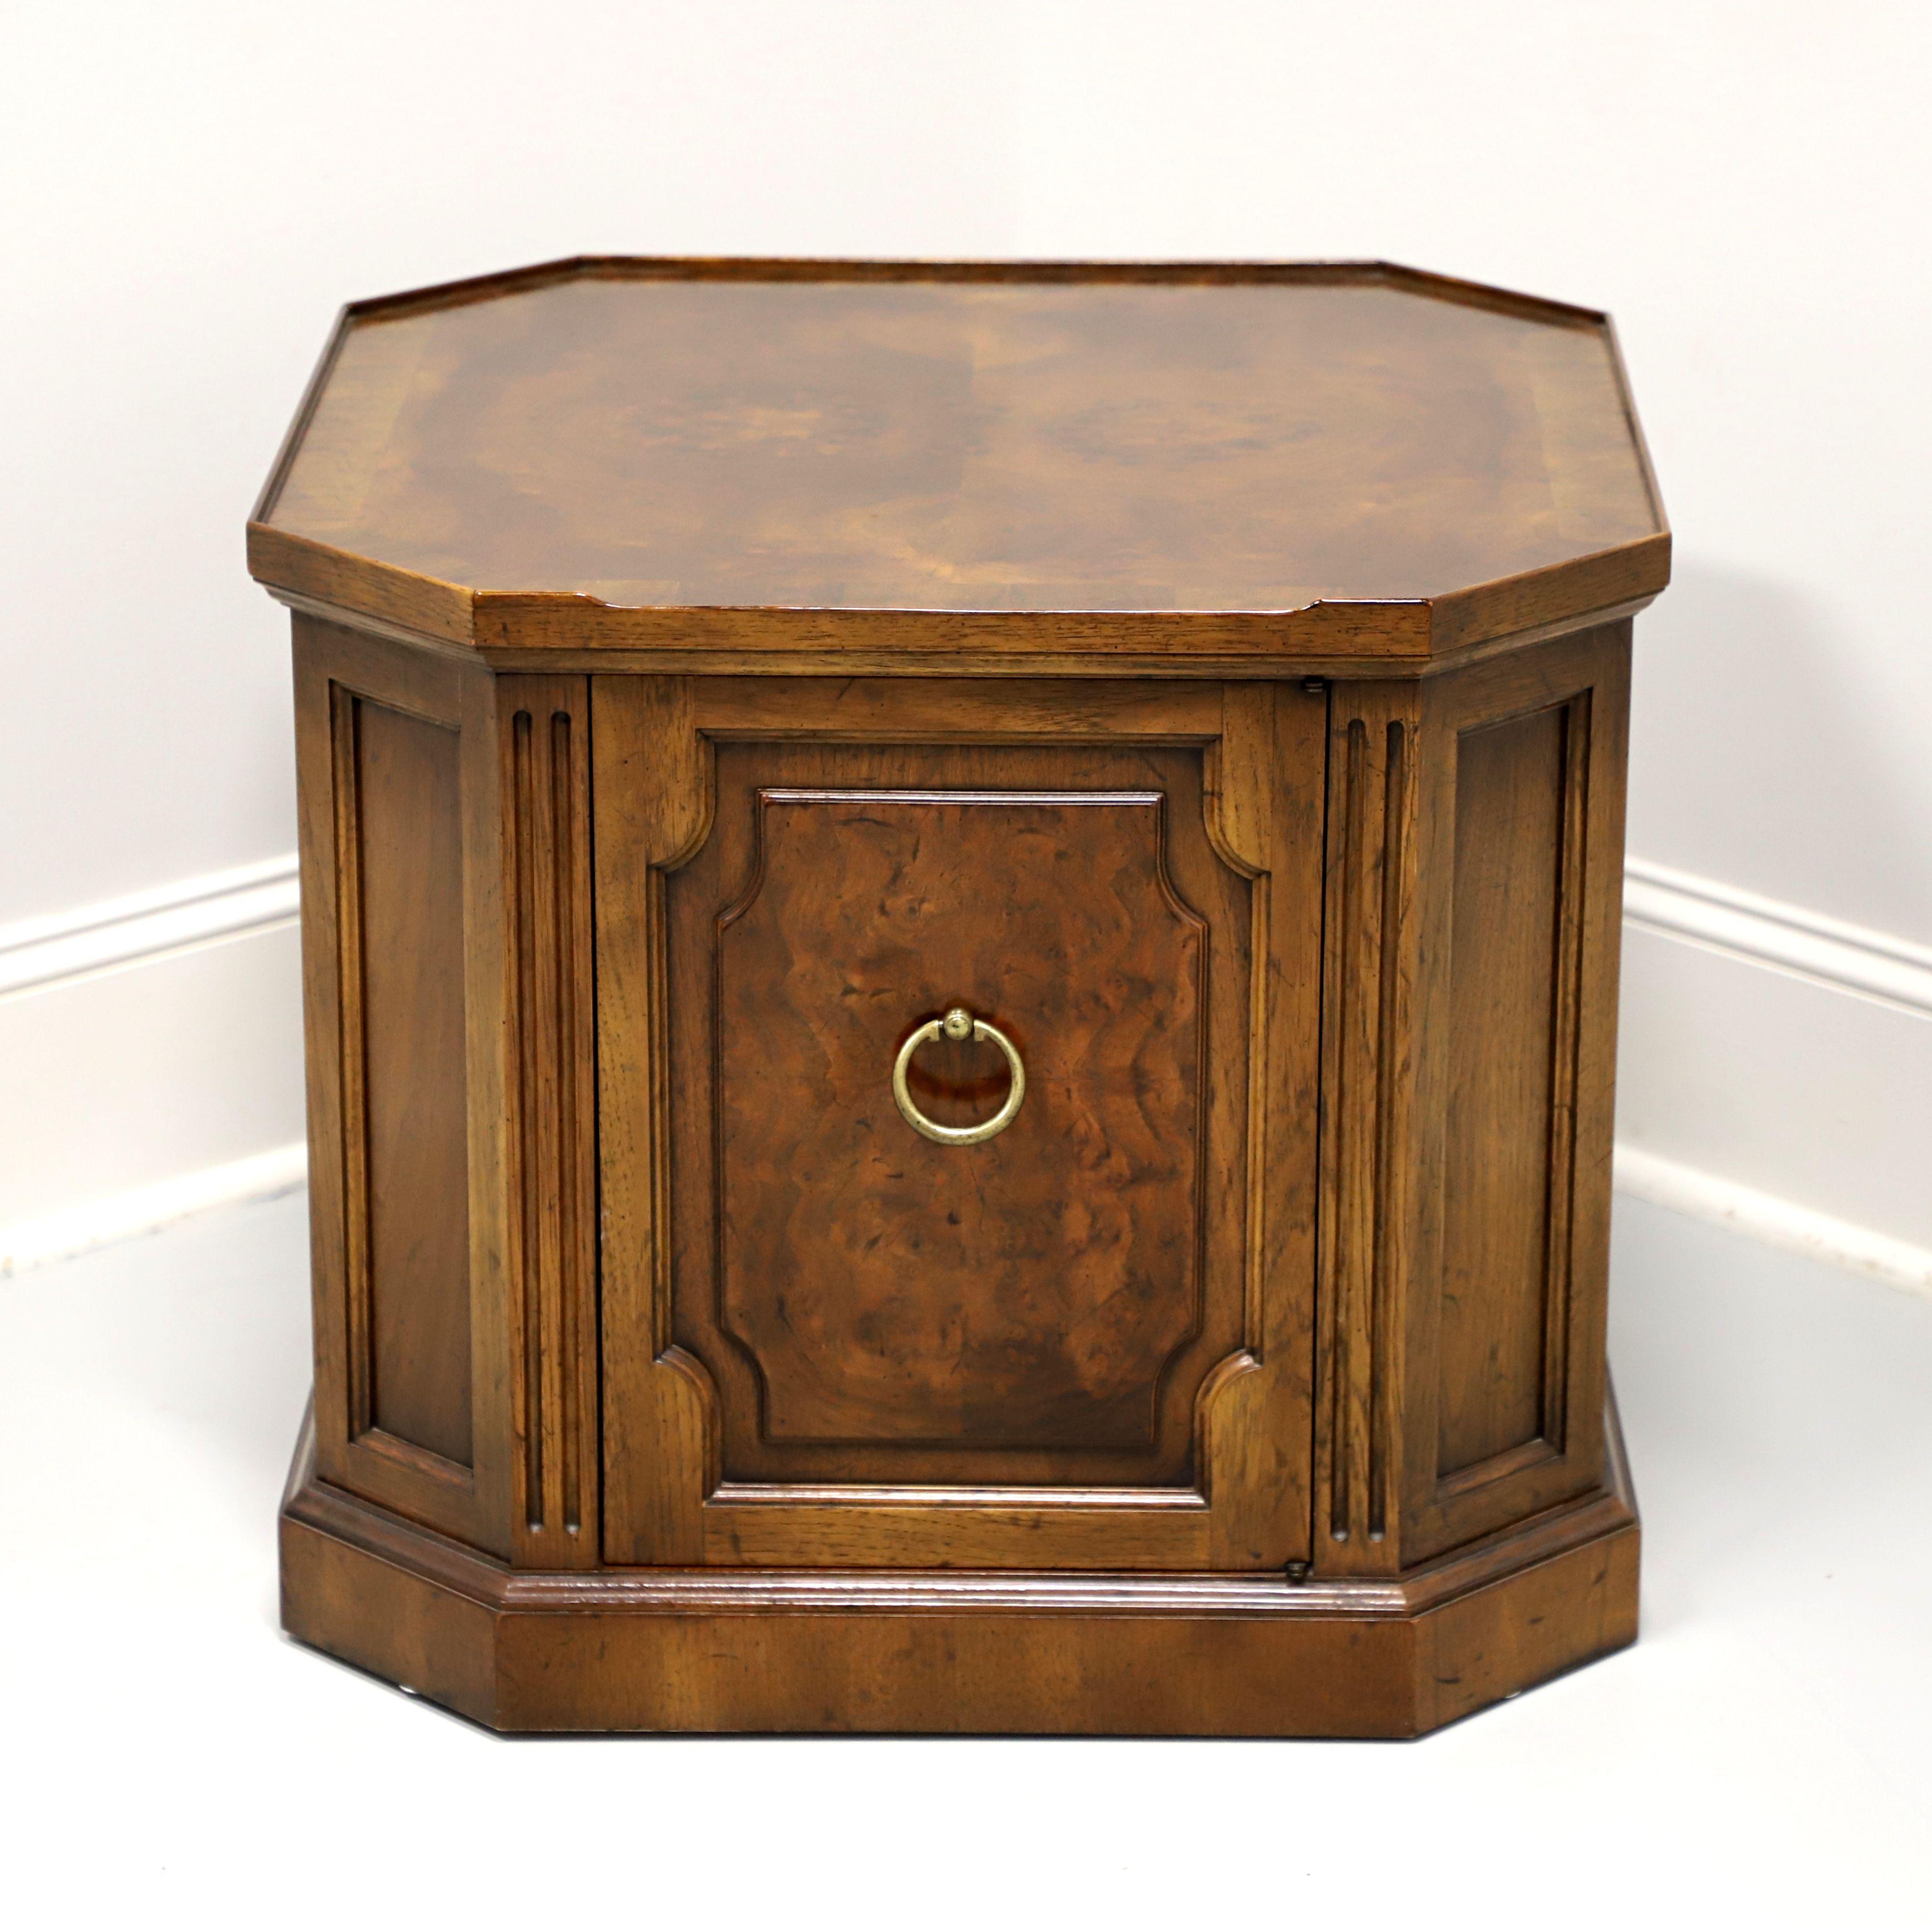 A French Regency style square cabinet side table by Drexel Heritage. Walnut with brass hardware, burl walnut top with low gallery edge, and a solid ogee edge base. Features a one door cabinet revealing interior storage. Made in North Carolina, USA,